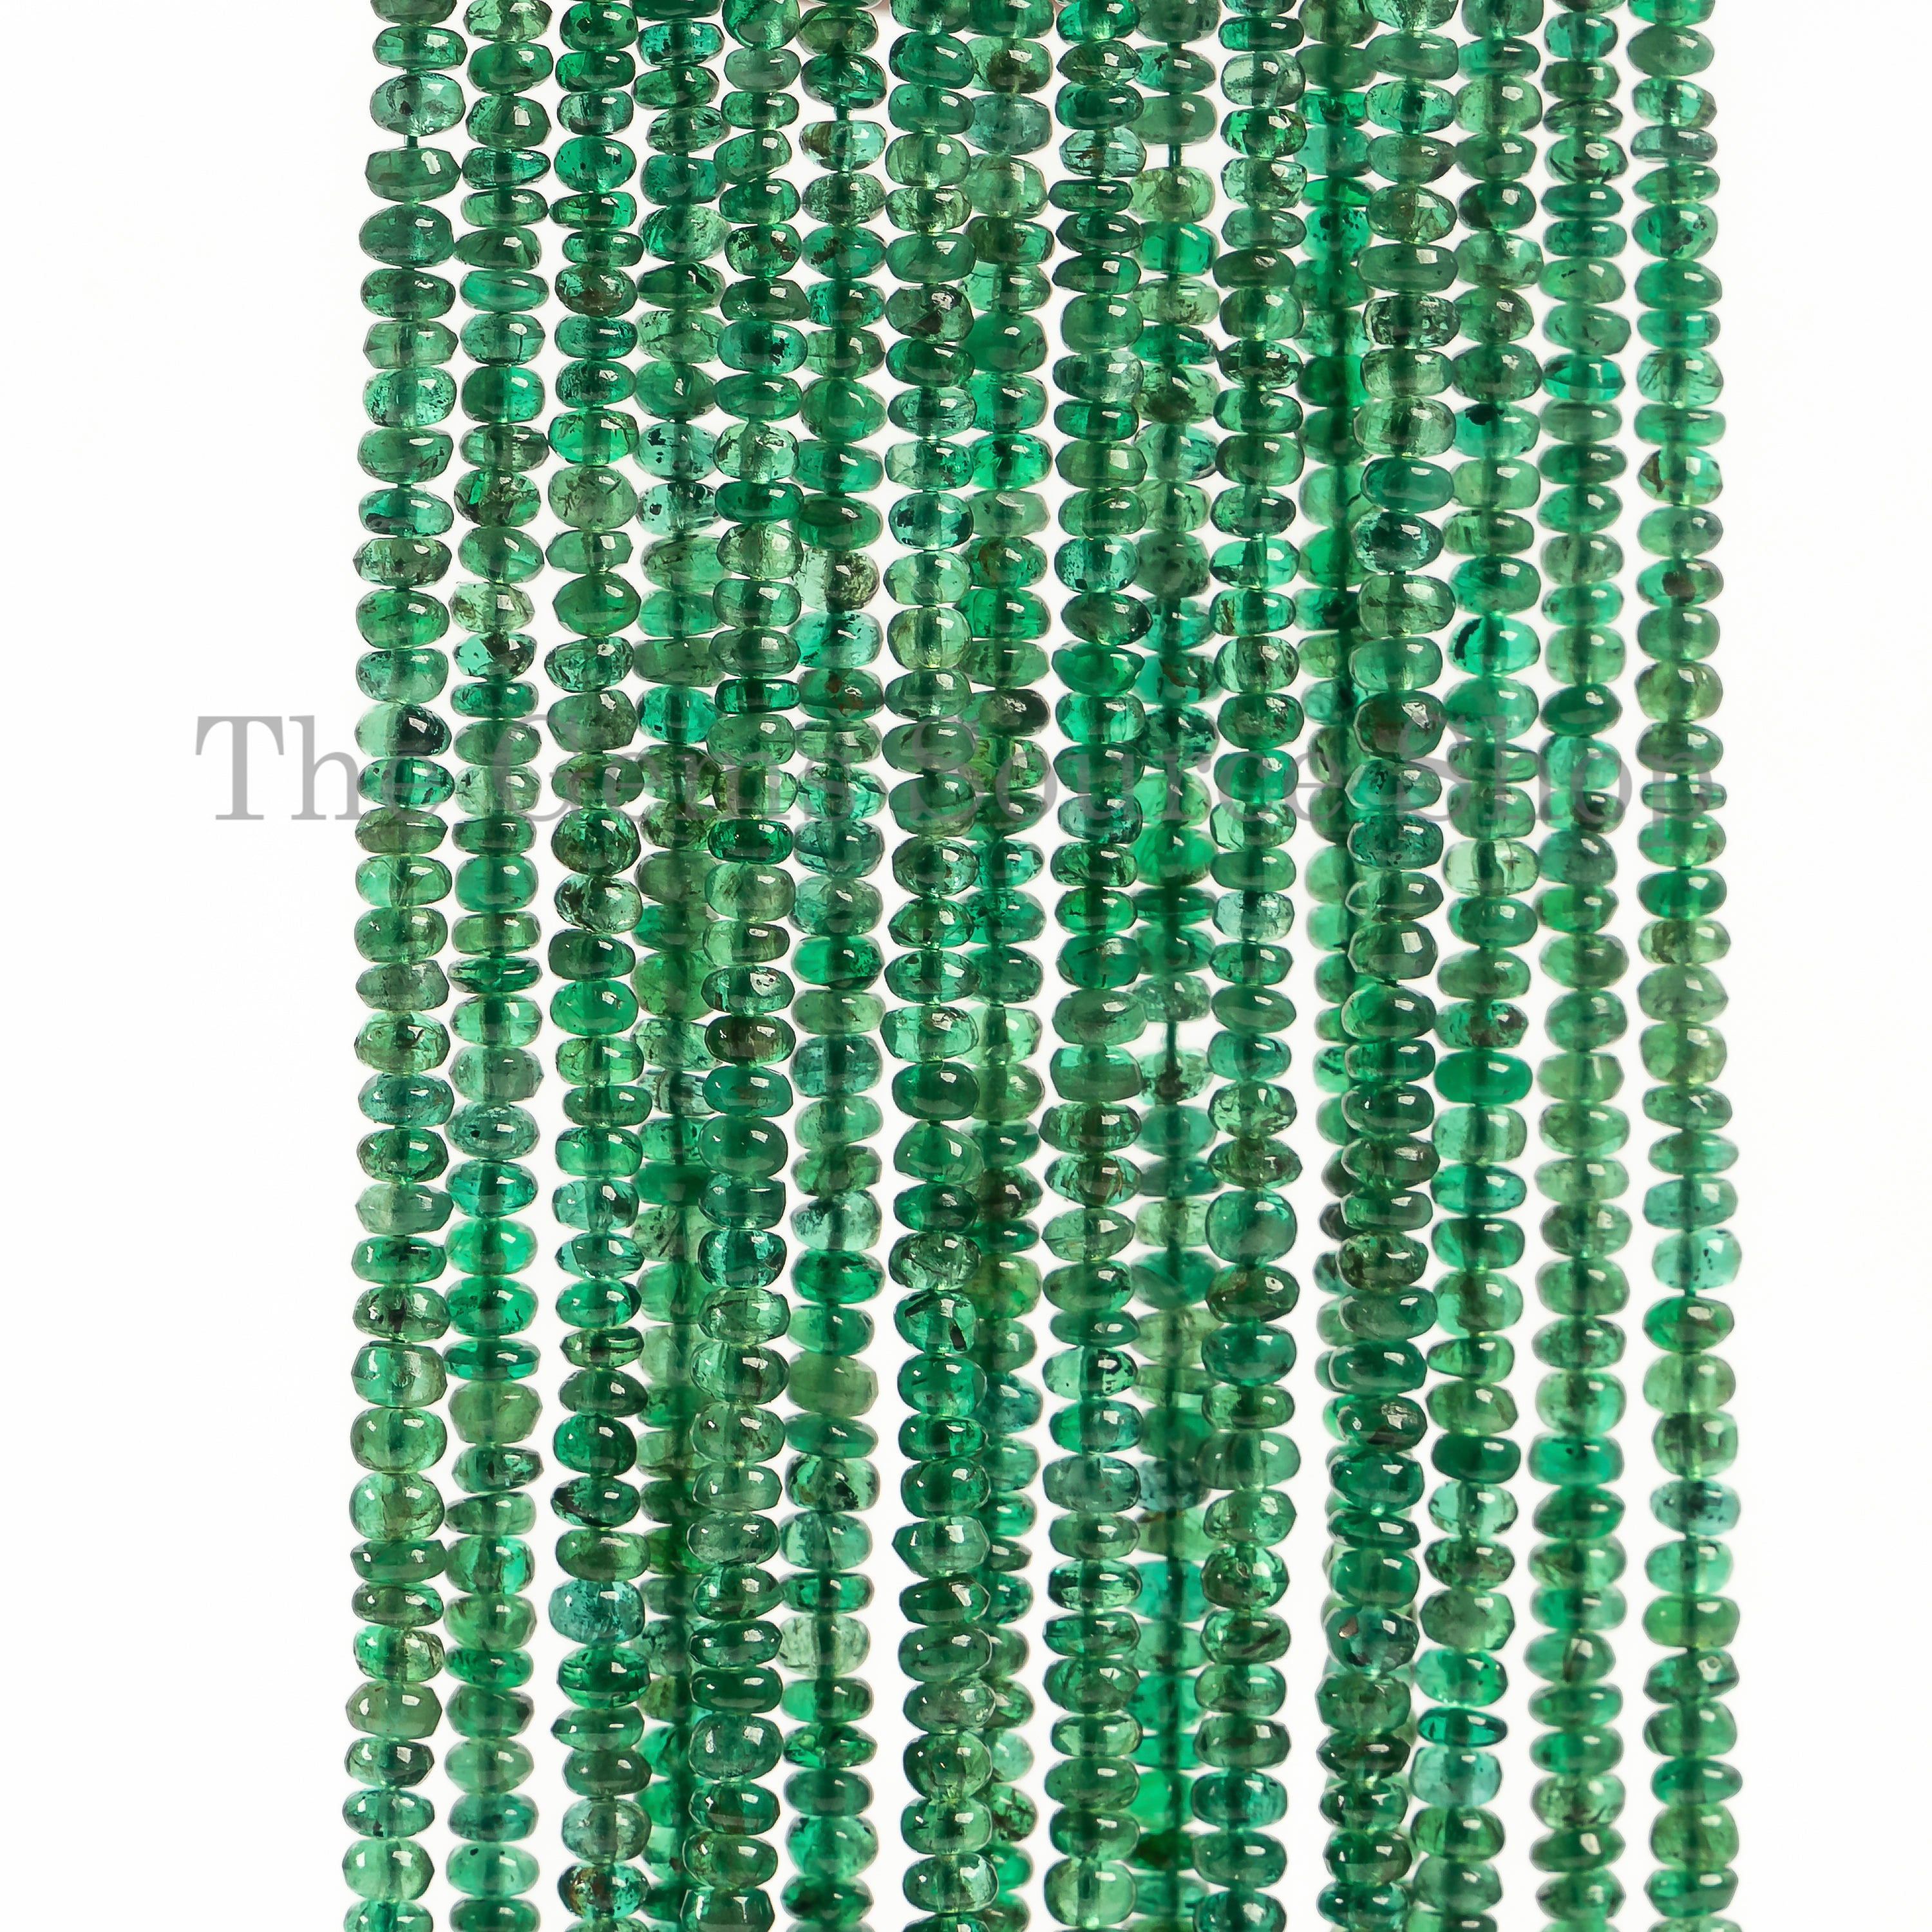 Natural 2-3 mm Emerald Beads, Emerald Rondelle Shape, Emerald Smooth Beads, Emerald Gemstone Beads